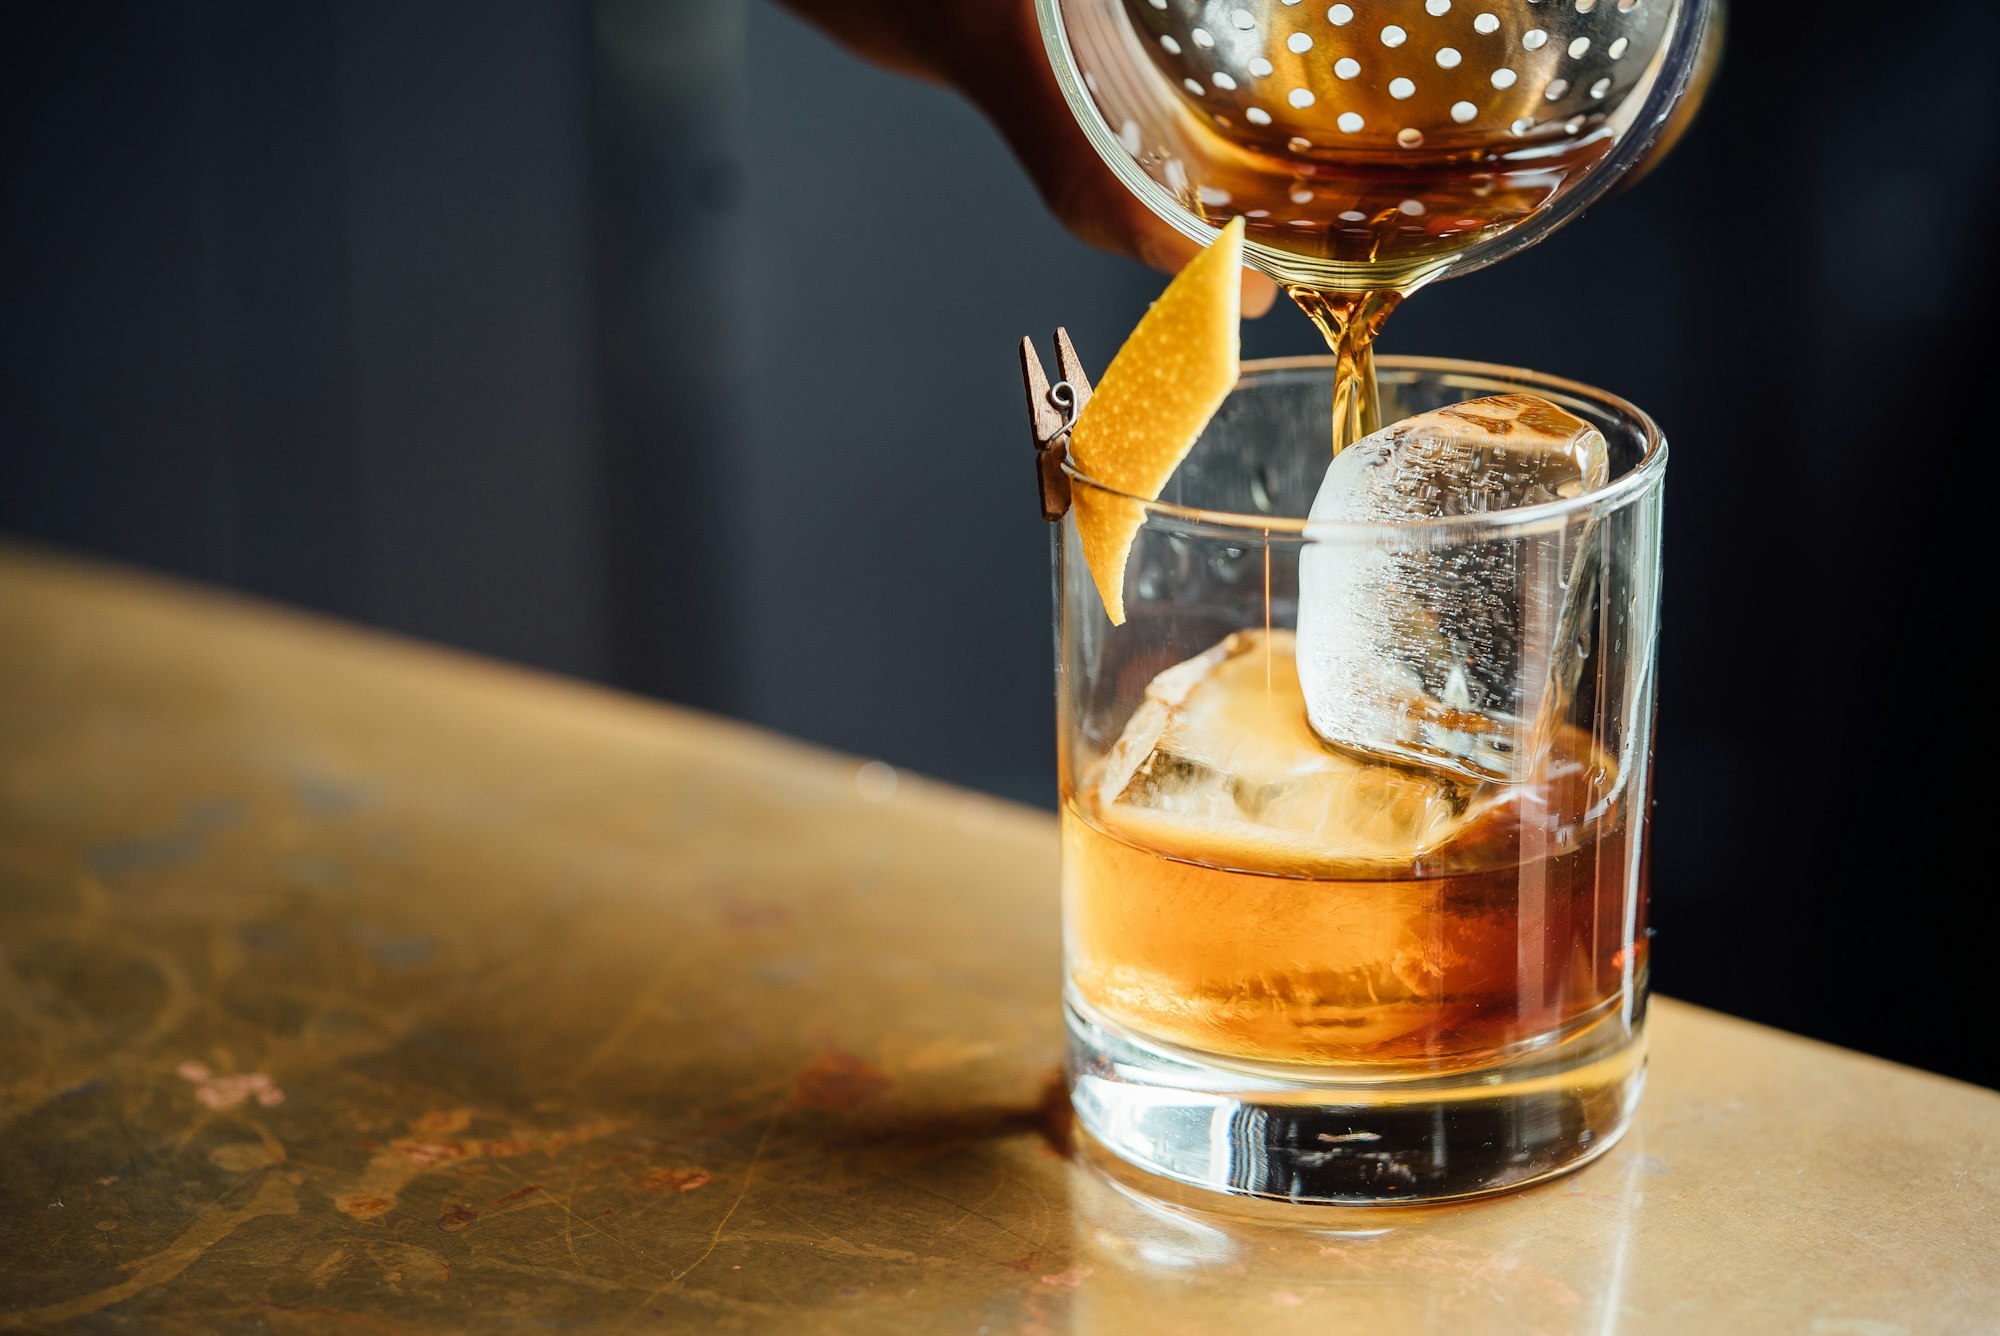 How to make an Old Fashioned Cocktail